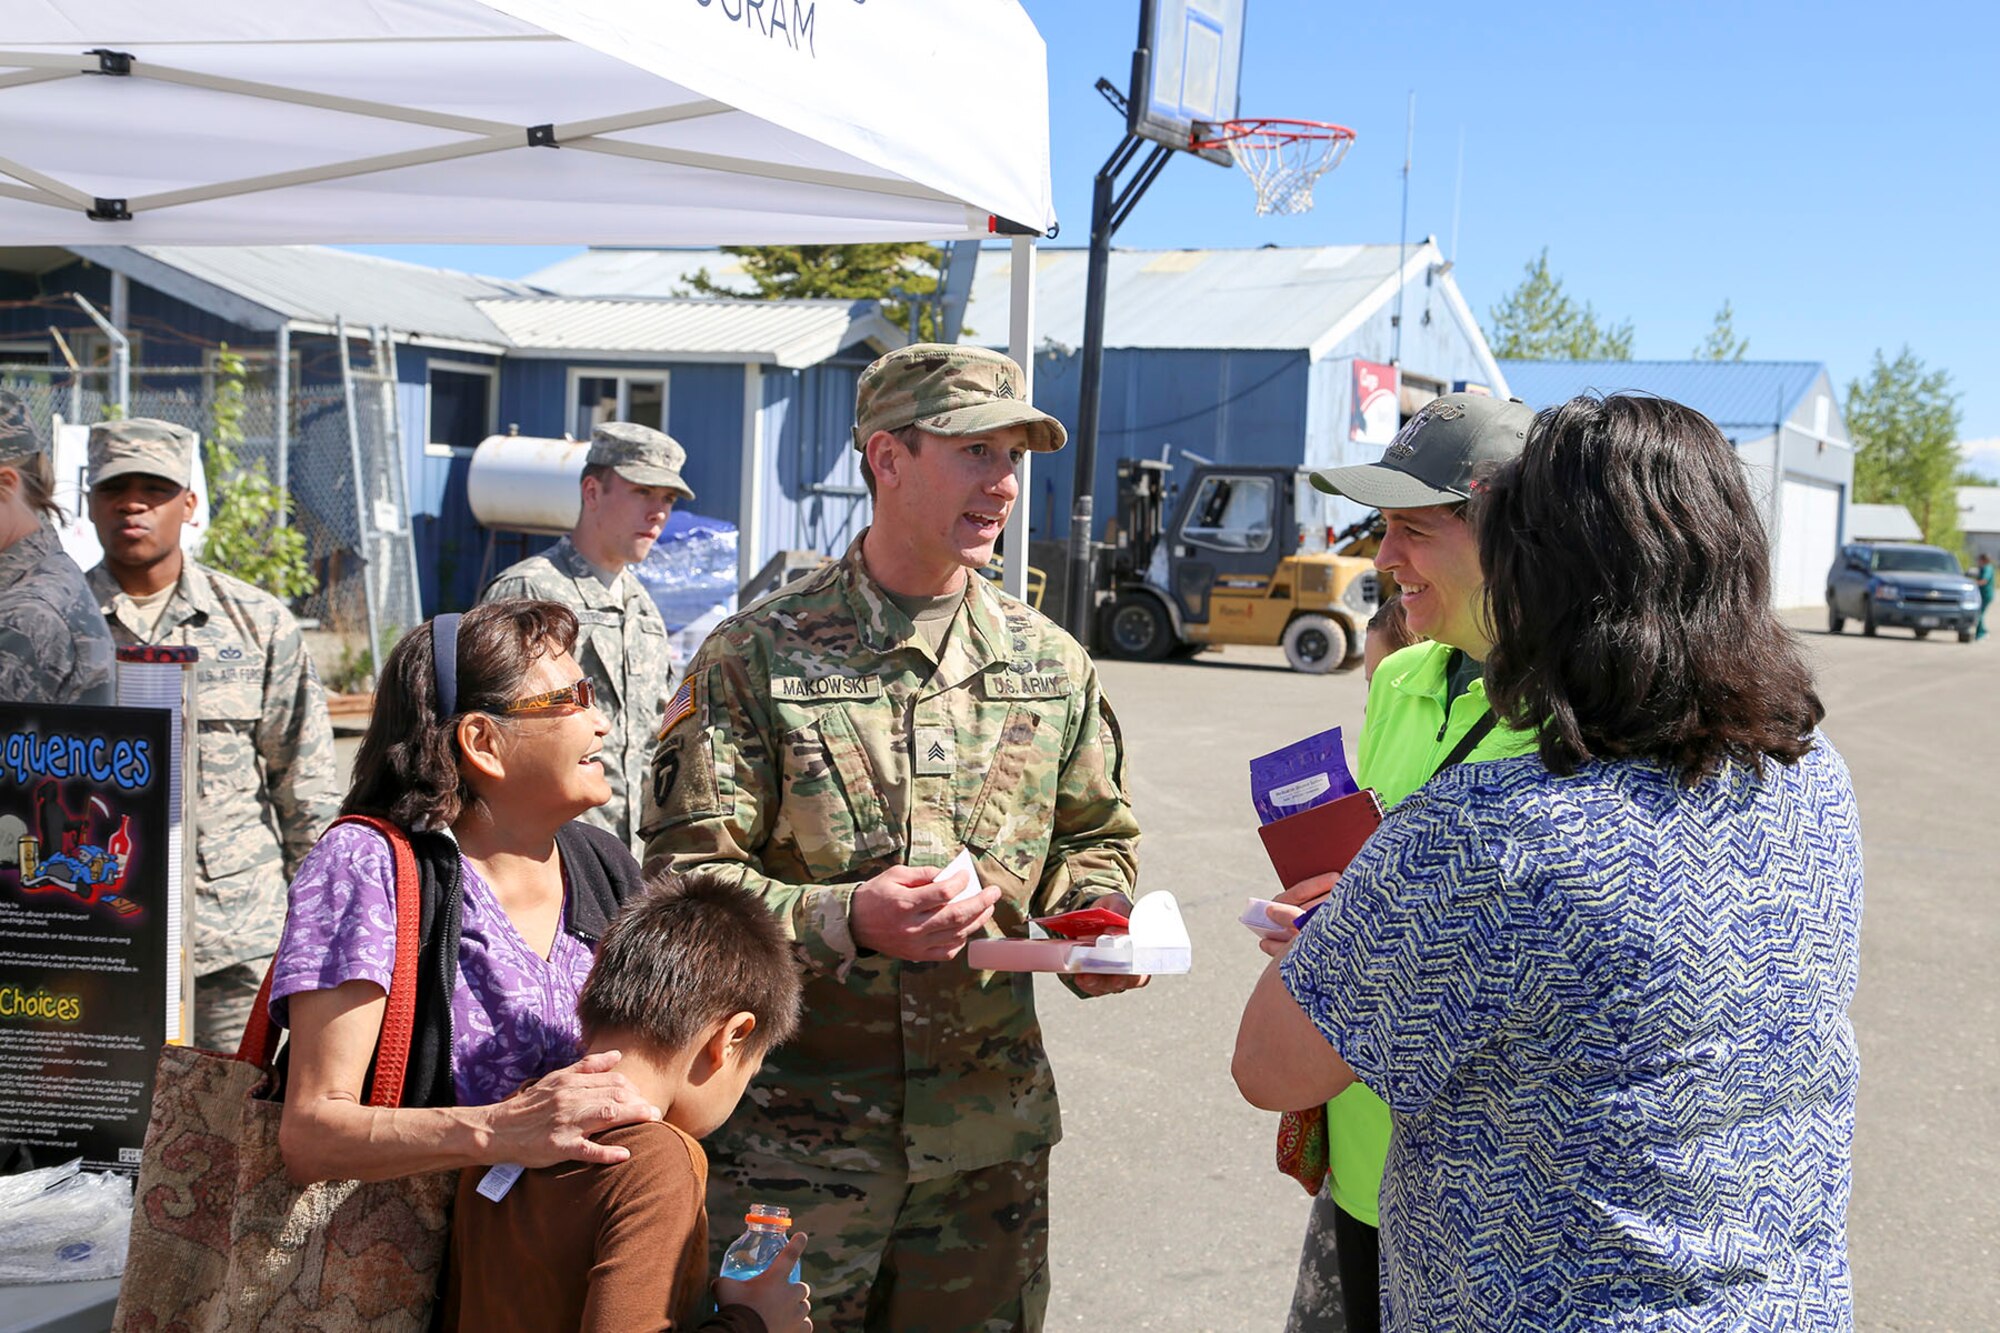 Alaska National Guard Sgt. Austin Makowski, civil operator with the Counterdrug Support Program, discusses the procedures for using the Narcan kit with local residents at the Edward G. Pitka Sr. Airport in Galena, Alaska, May 31, 2017. Twelve Guardsmen from the CDSP traveled to the Yukon-Koyukuk Region hub to deliver the kits that block the effects of opioids and reverses an overdose, and to provide drug and alcohol education and prevention materials to local residents. (U.S. Army National Guard photo by Staff Sgt. Balinda O’Neal Dresel)